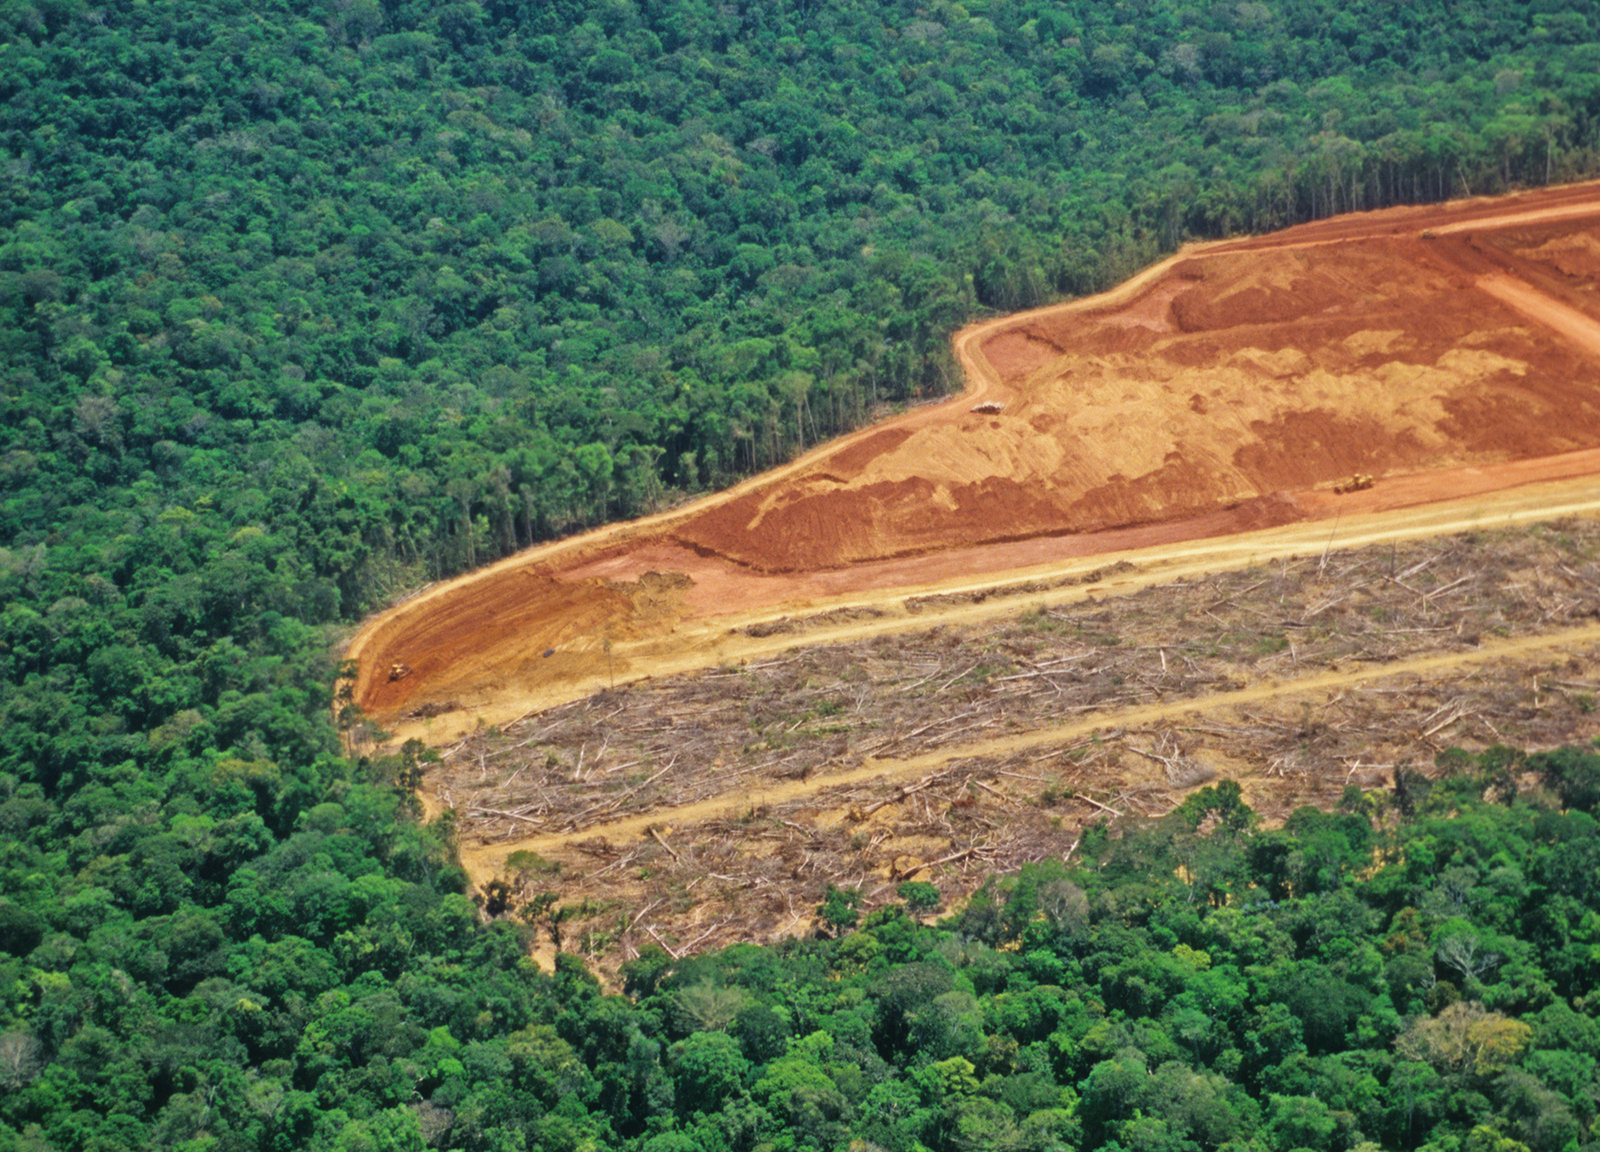 NGOs suggest the path to zero deforestation in the Amazon